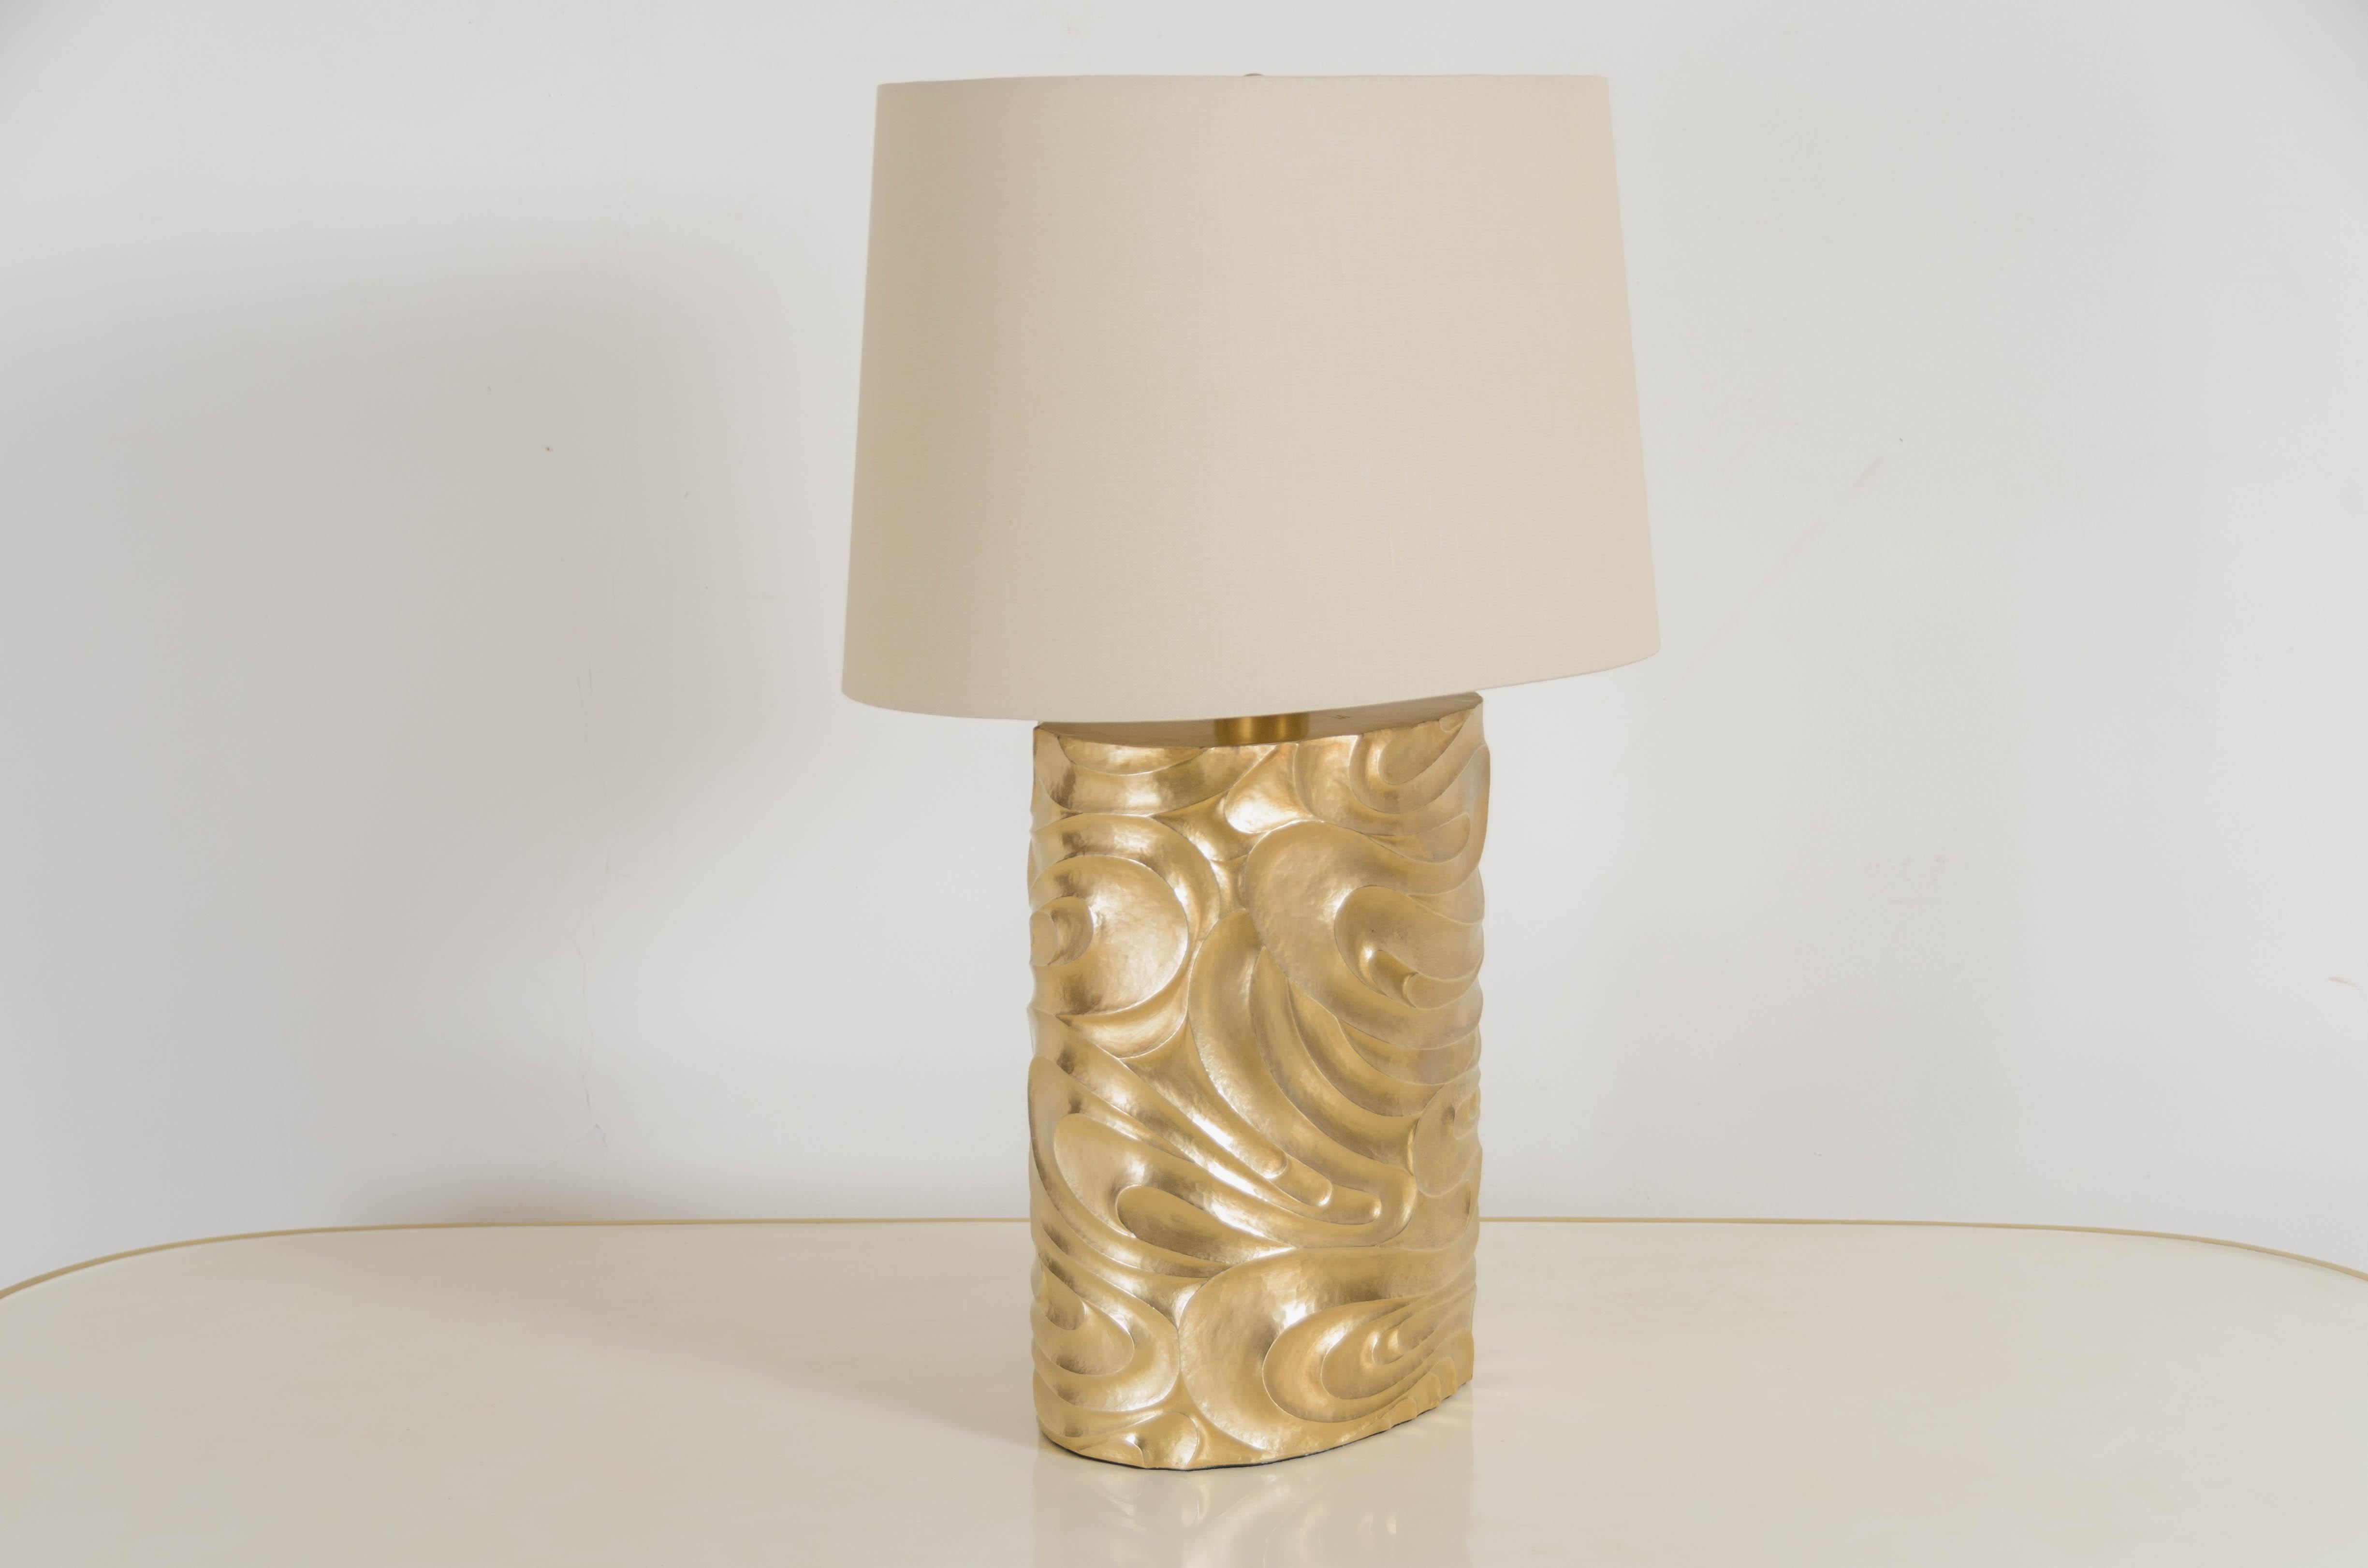 Modern Contemporary 24K Gold Plated Oval Fei Tian Wen Lamp by Robert Kuo For Sale